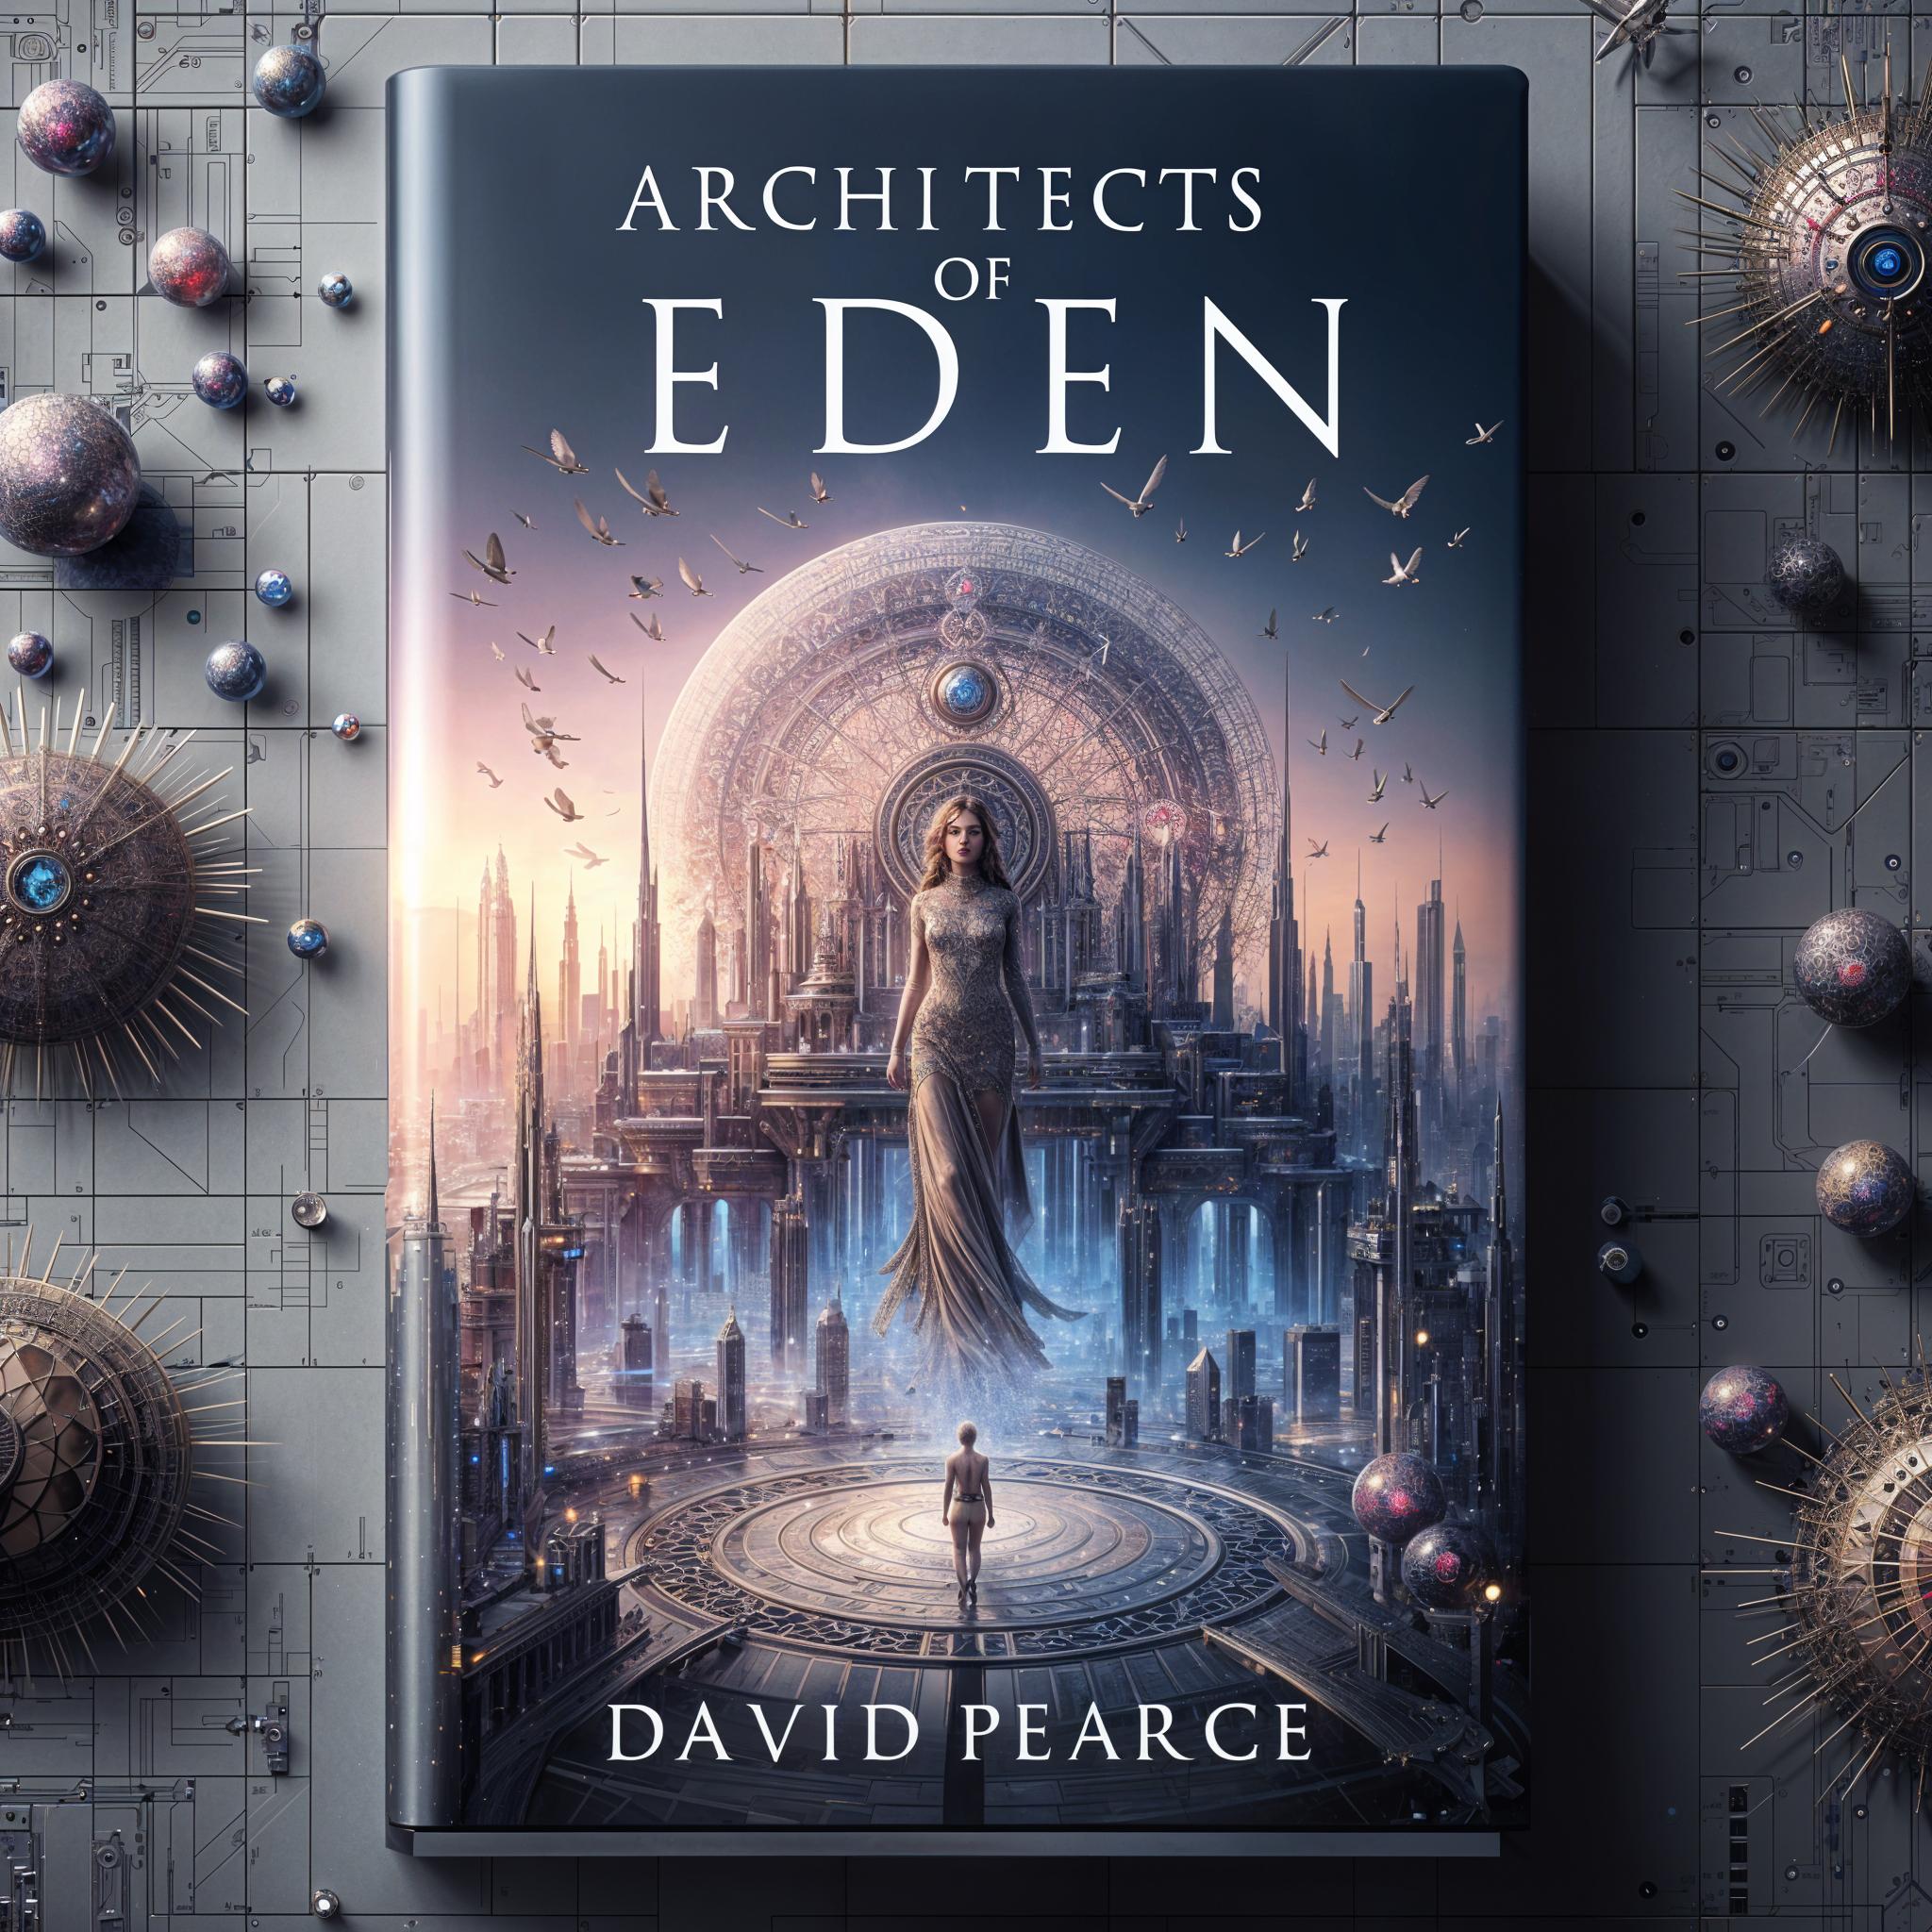 Architects of Eden by David Pearce